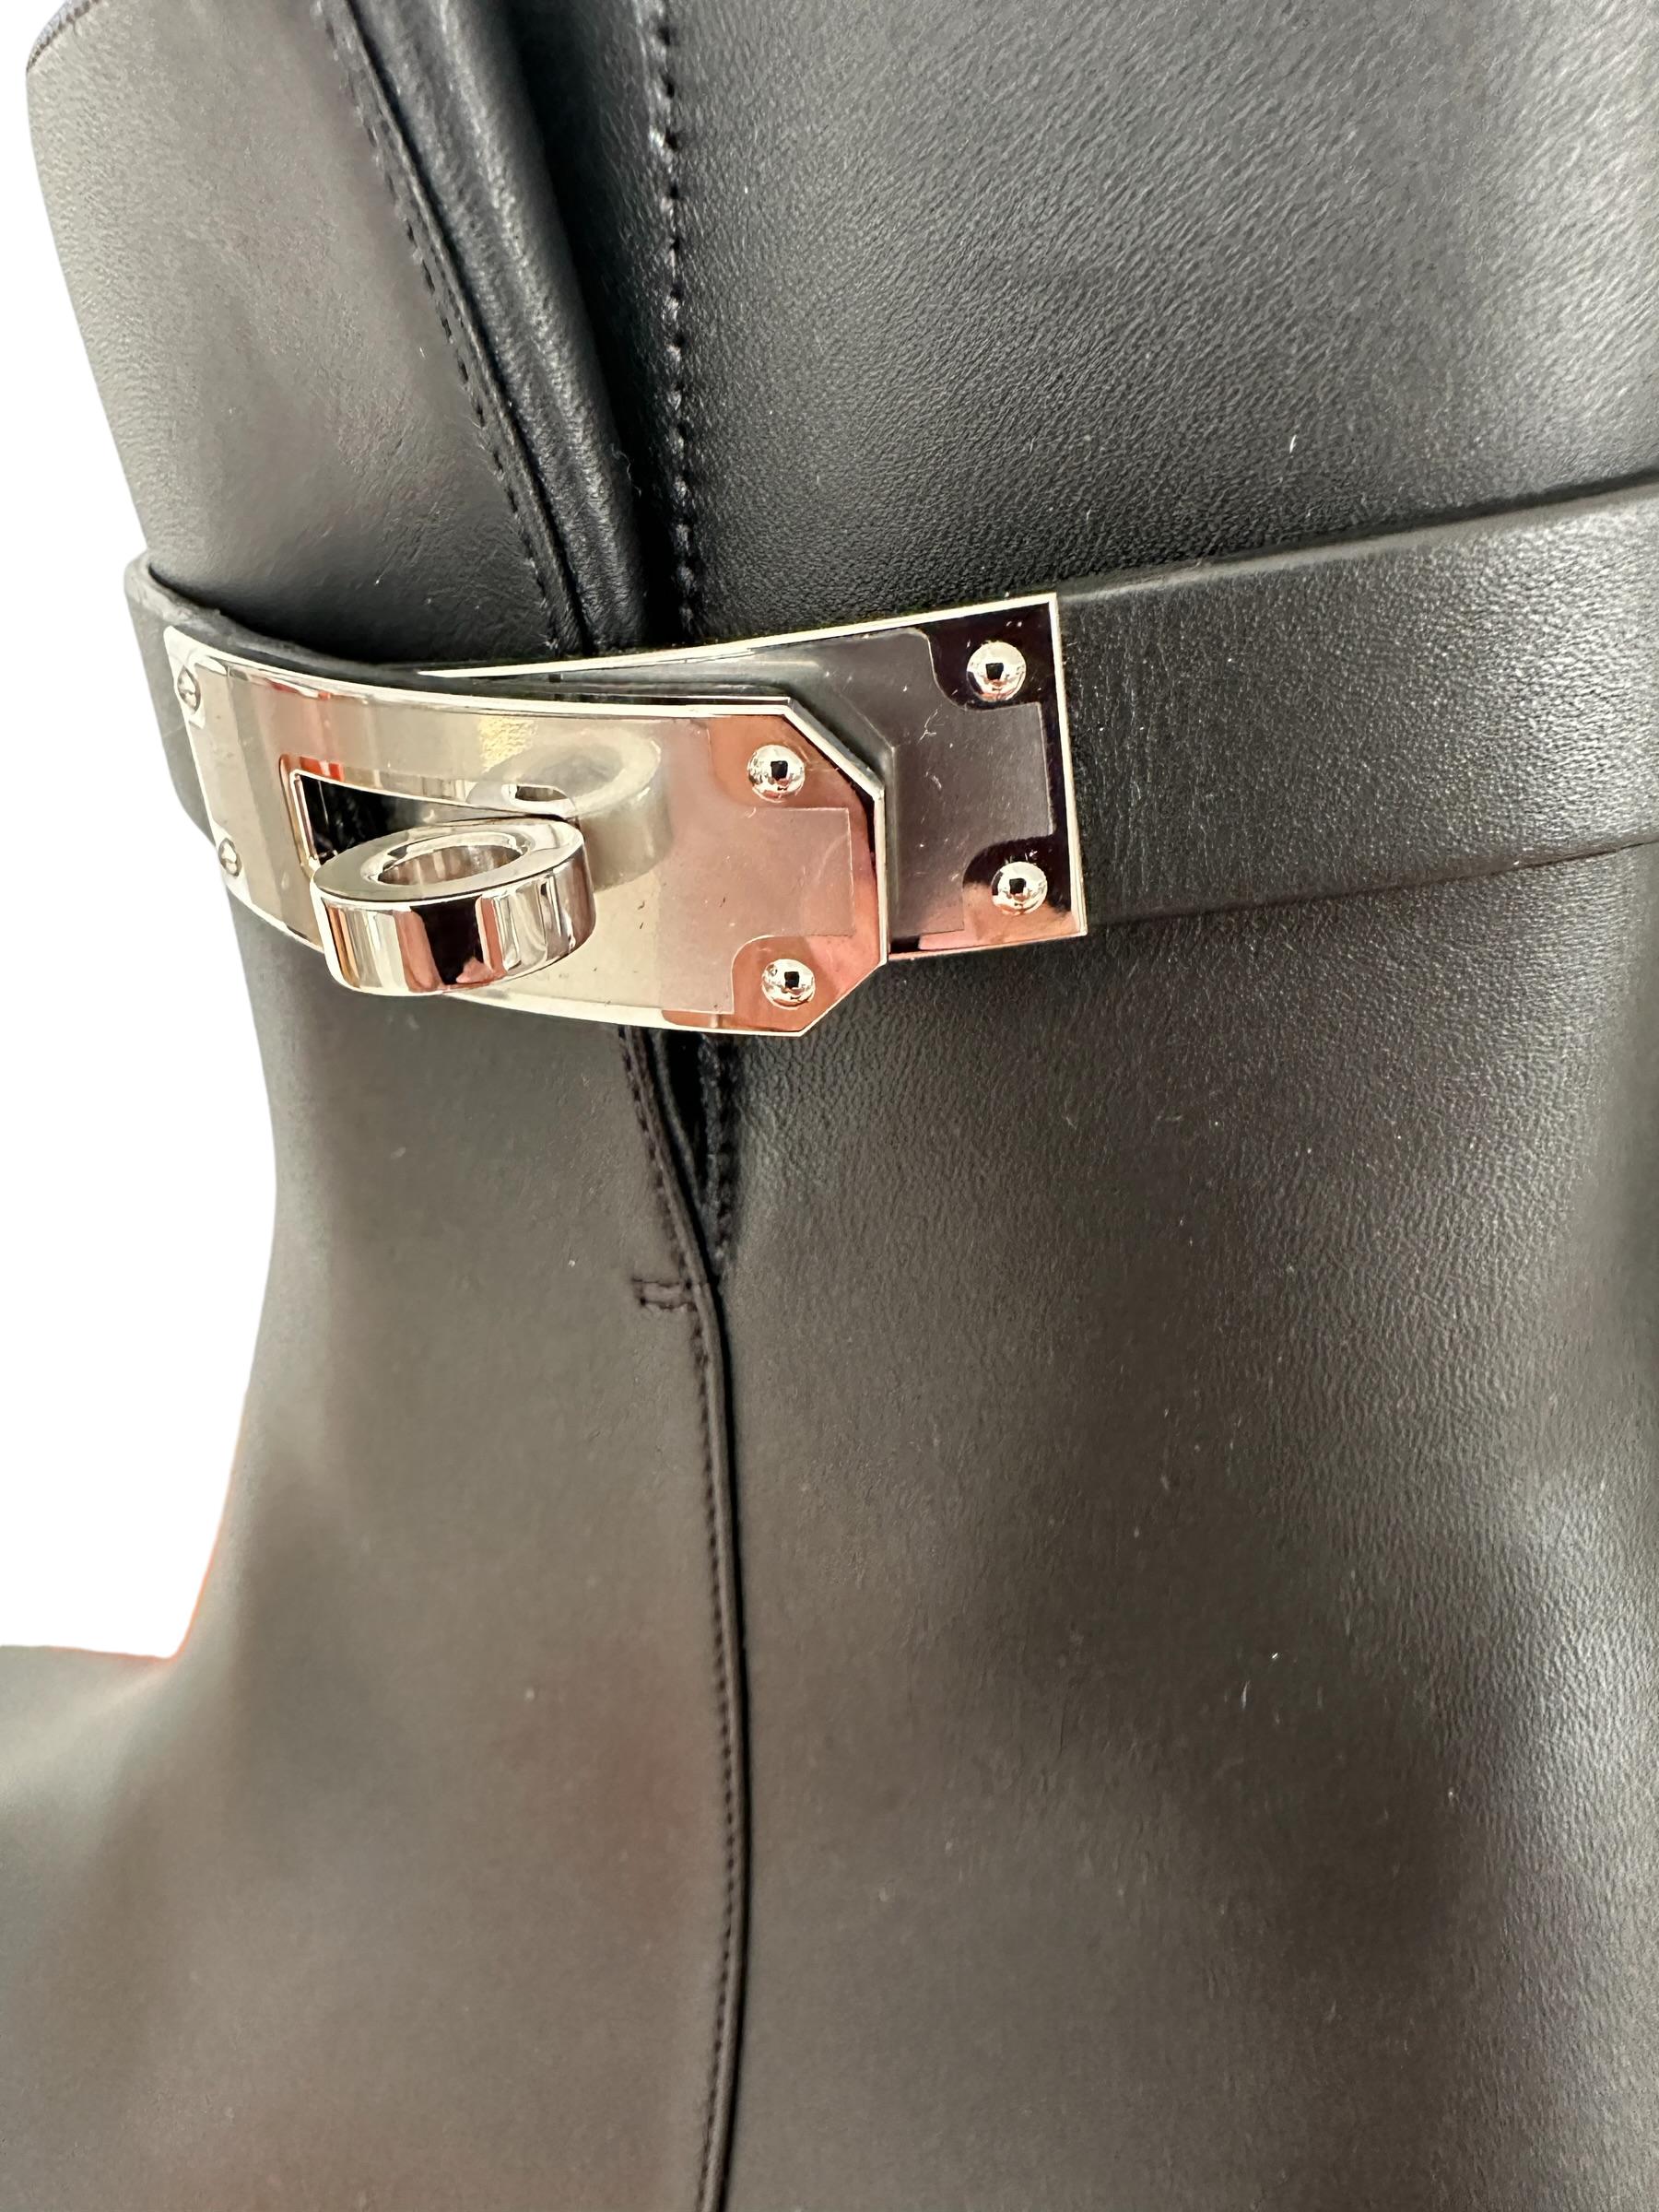 Hermes Boots Saint Germain Ankle Boot Black 40 Kelly Buckle $2000 retail In New Condition For Sale In West Chester, PA